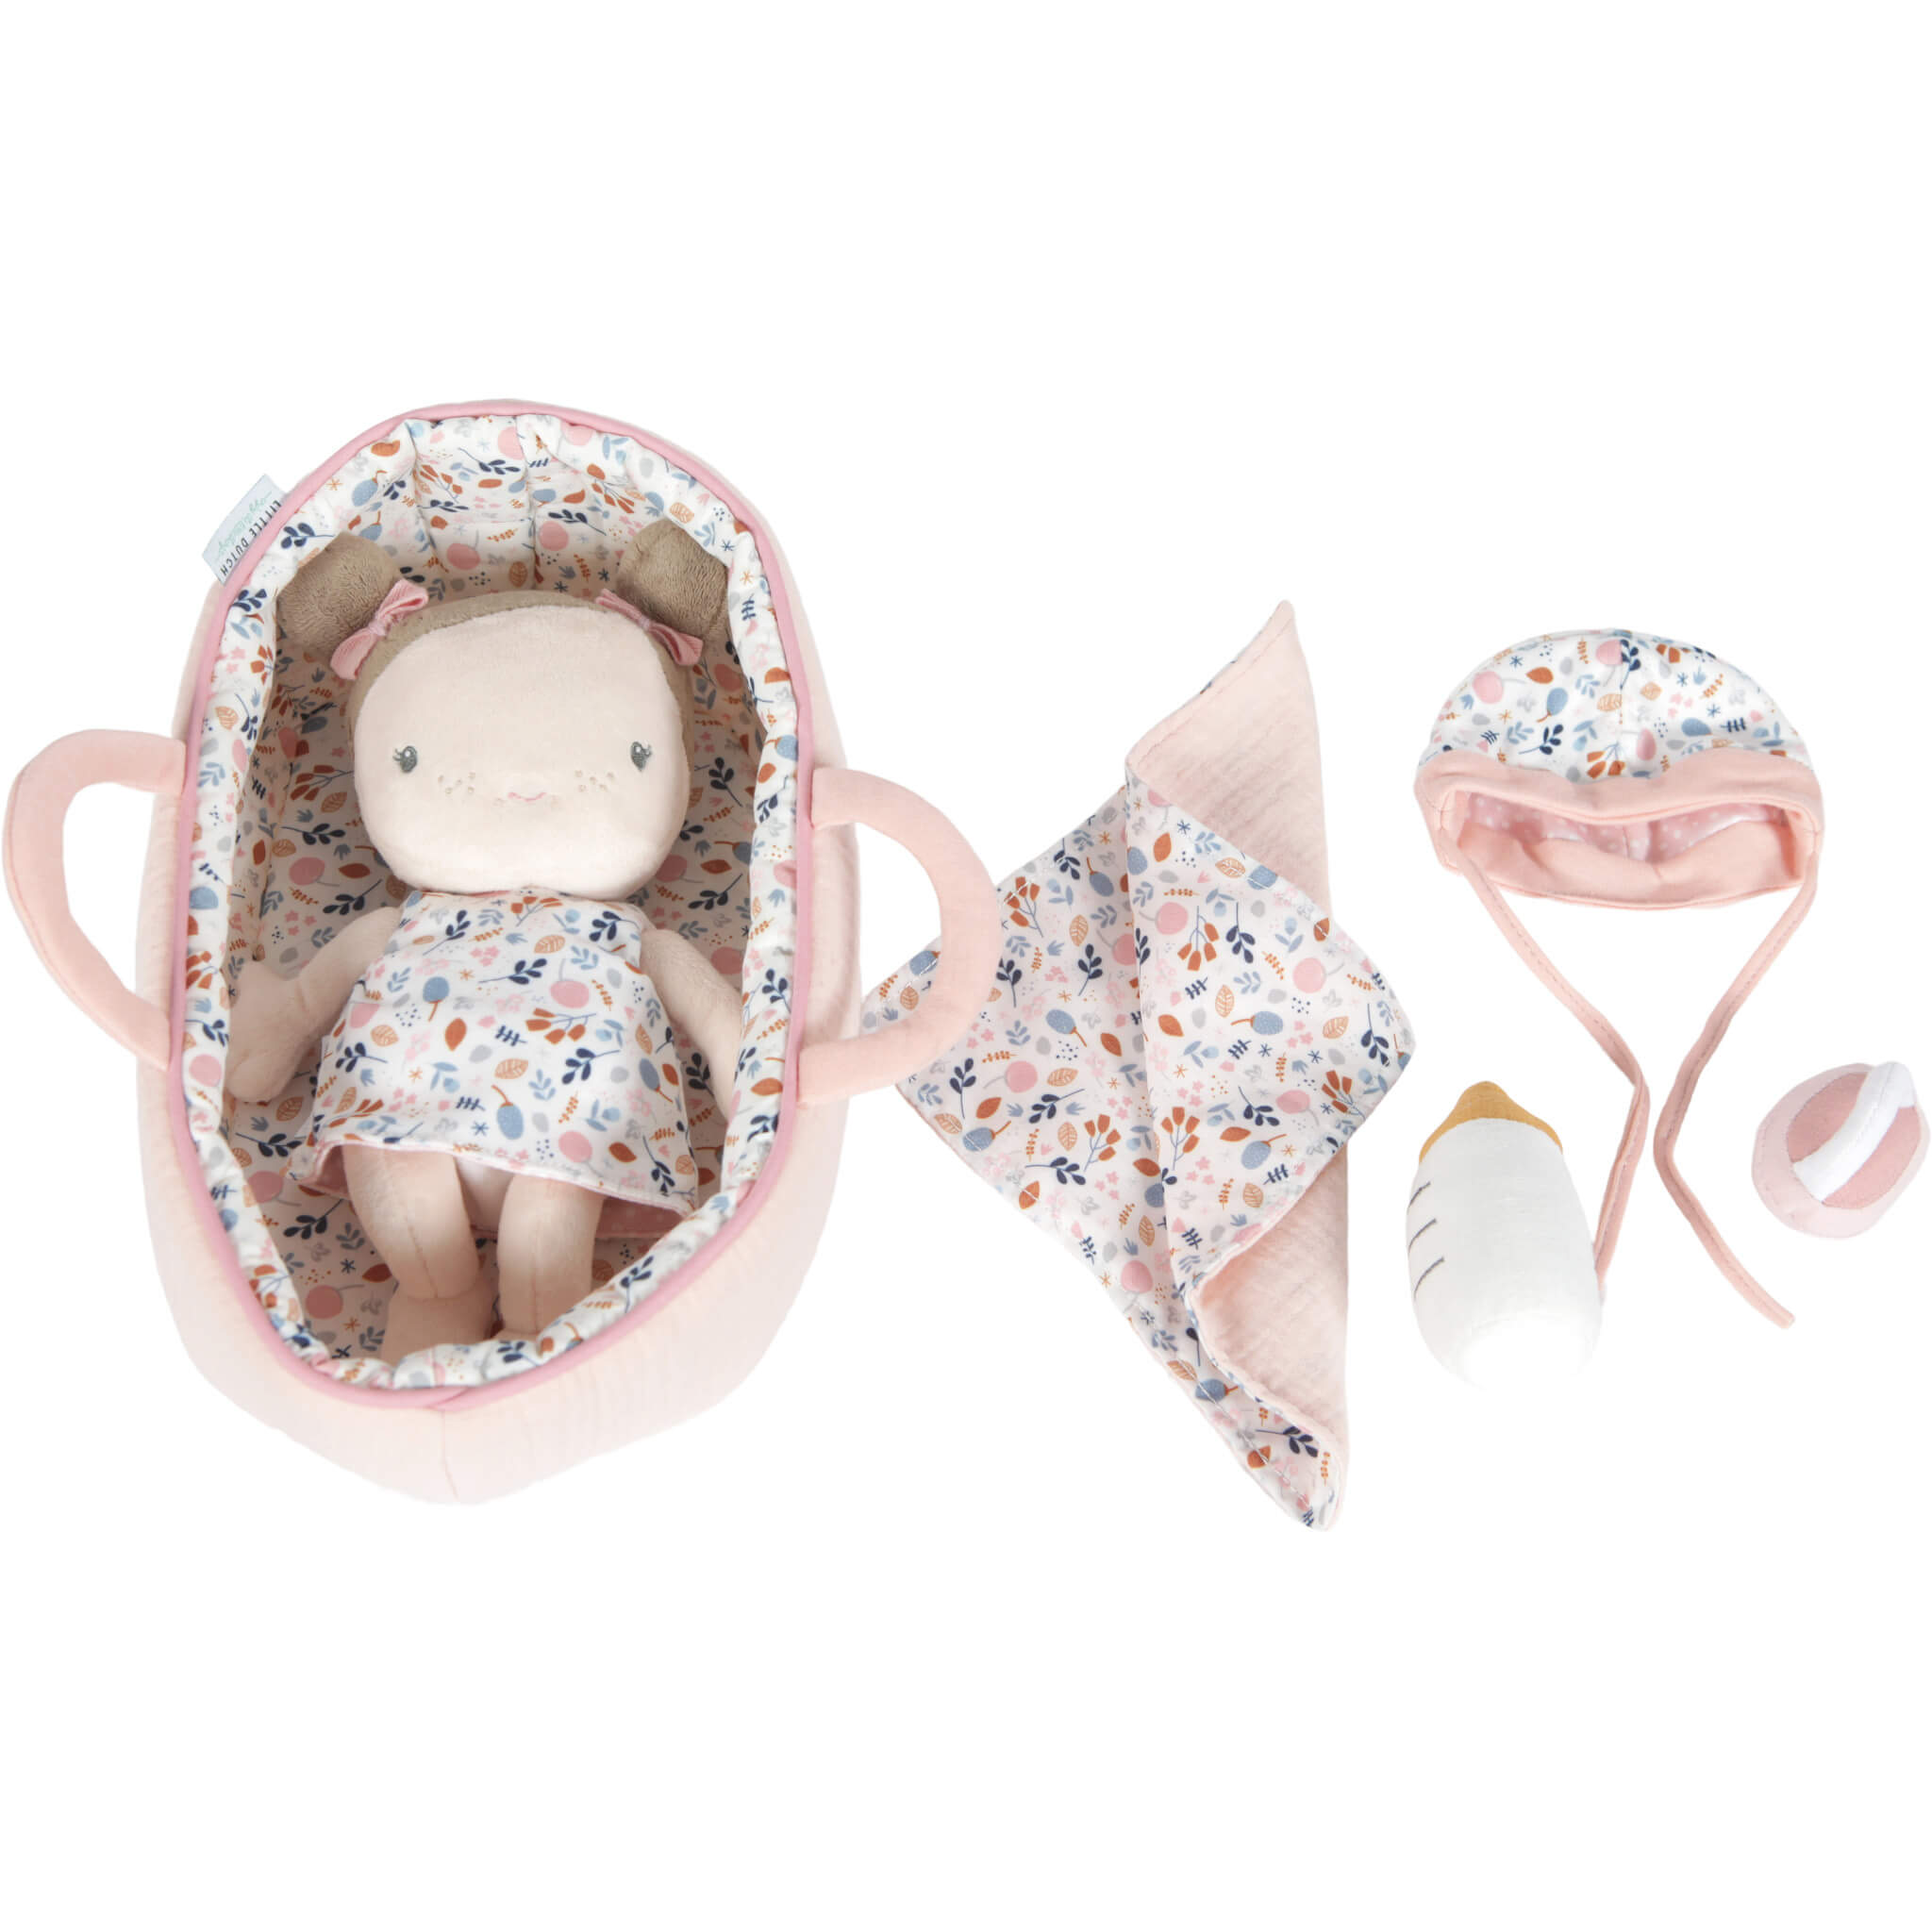 Little Dutch Baby Doll - Rosa with Accessories